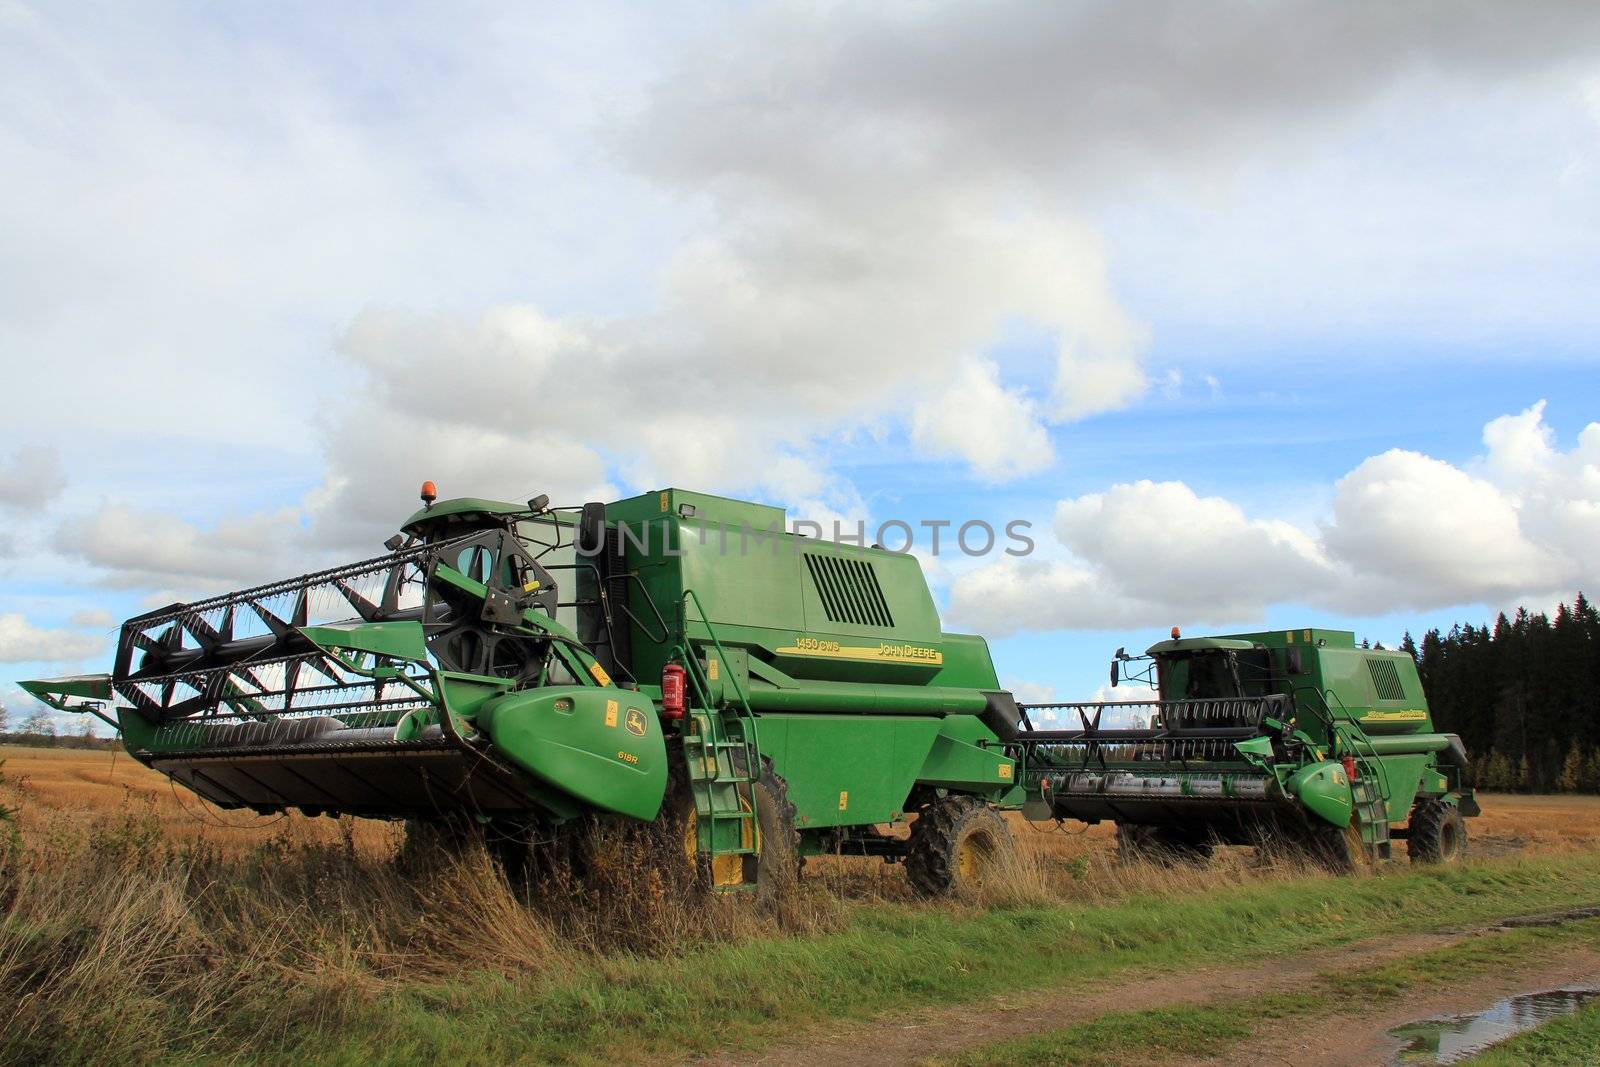 SALO, FINLAND - CIRCA OCTOBER 2012 - Two John Deere Harvesters standing by stubble field. Due to wet and cool weather conditions in 2012, the harvesting season is several weeks late.